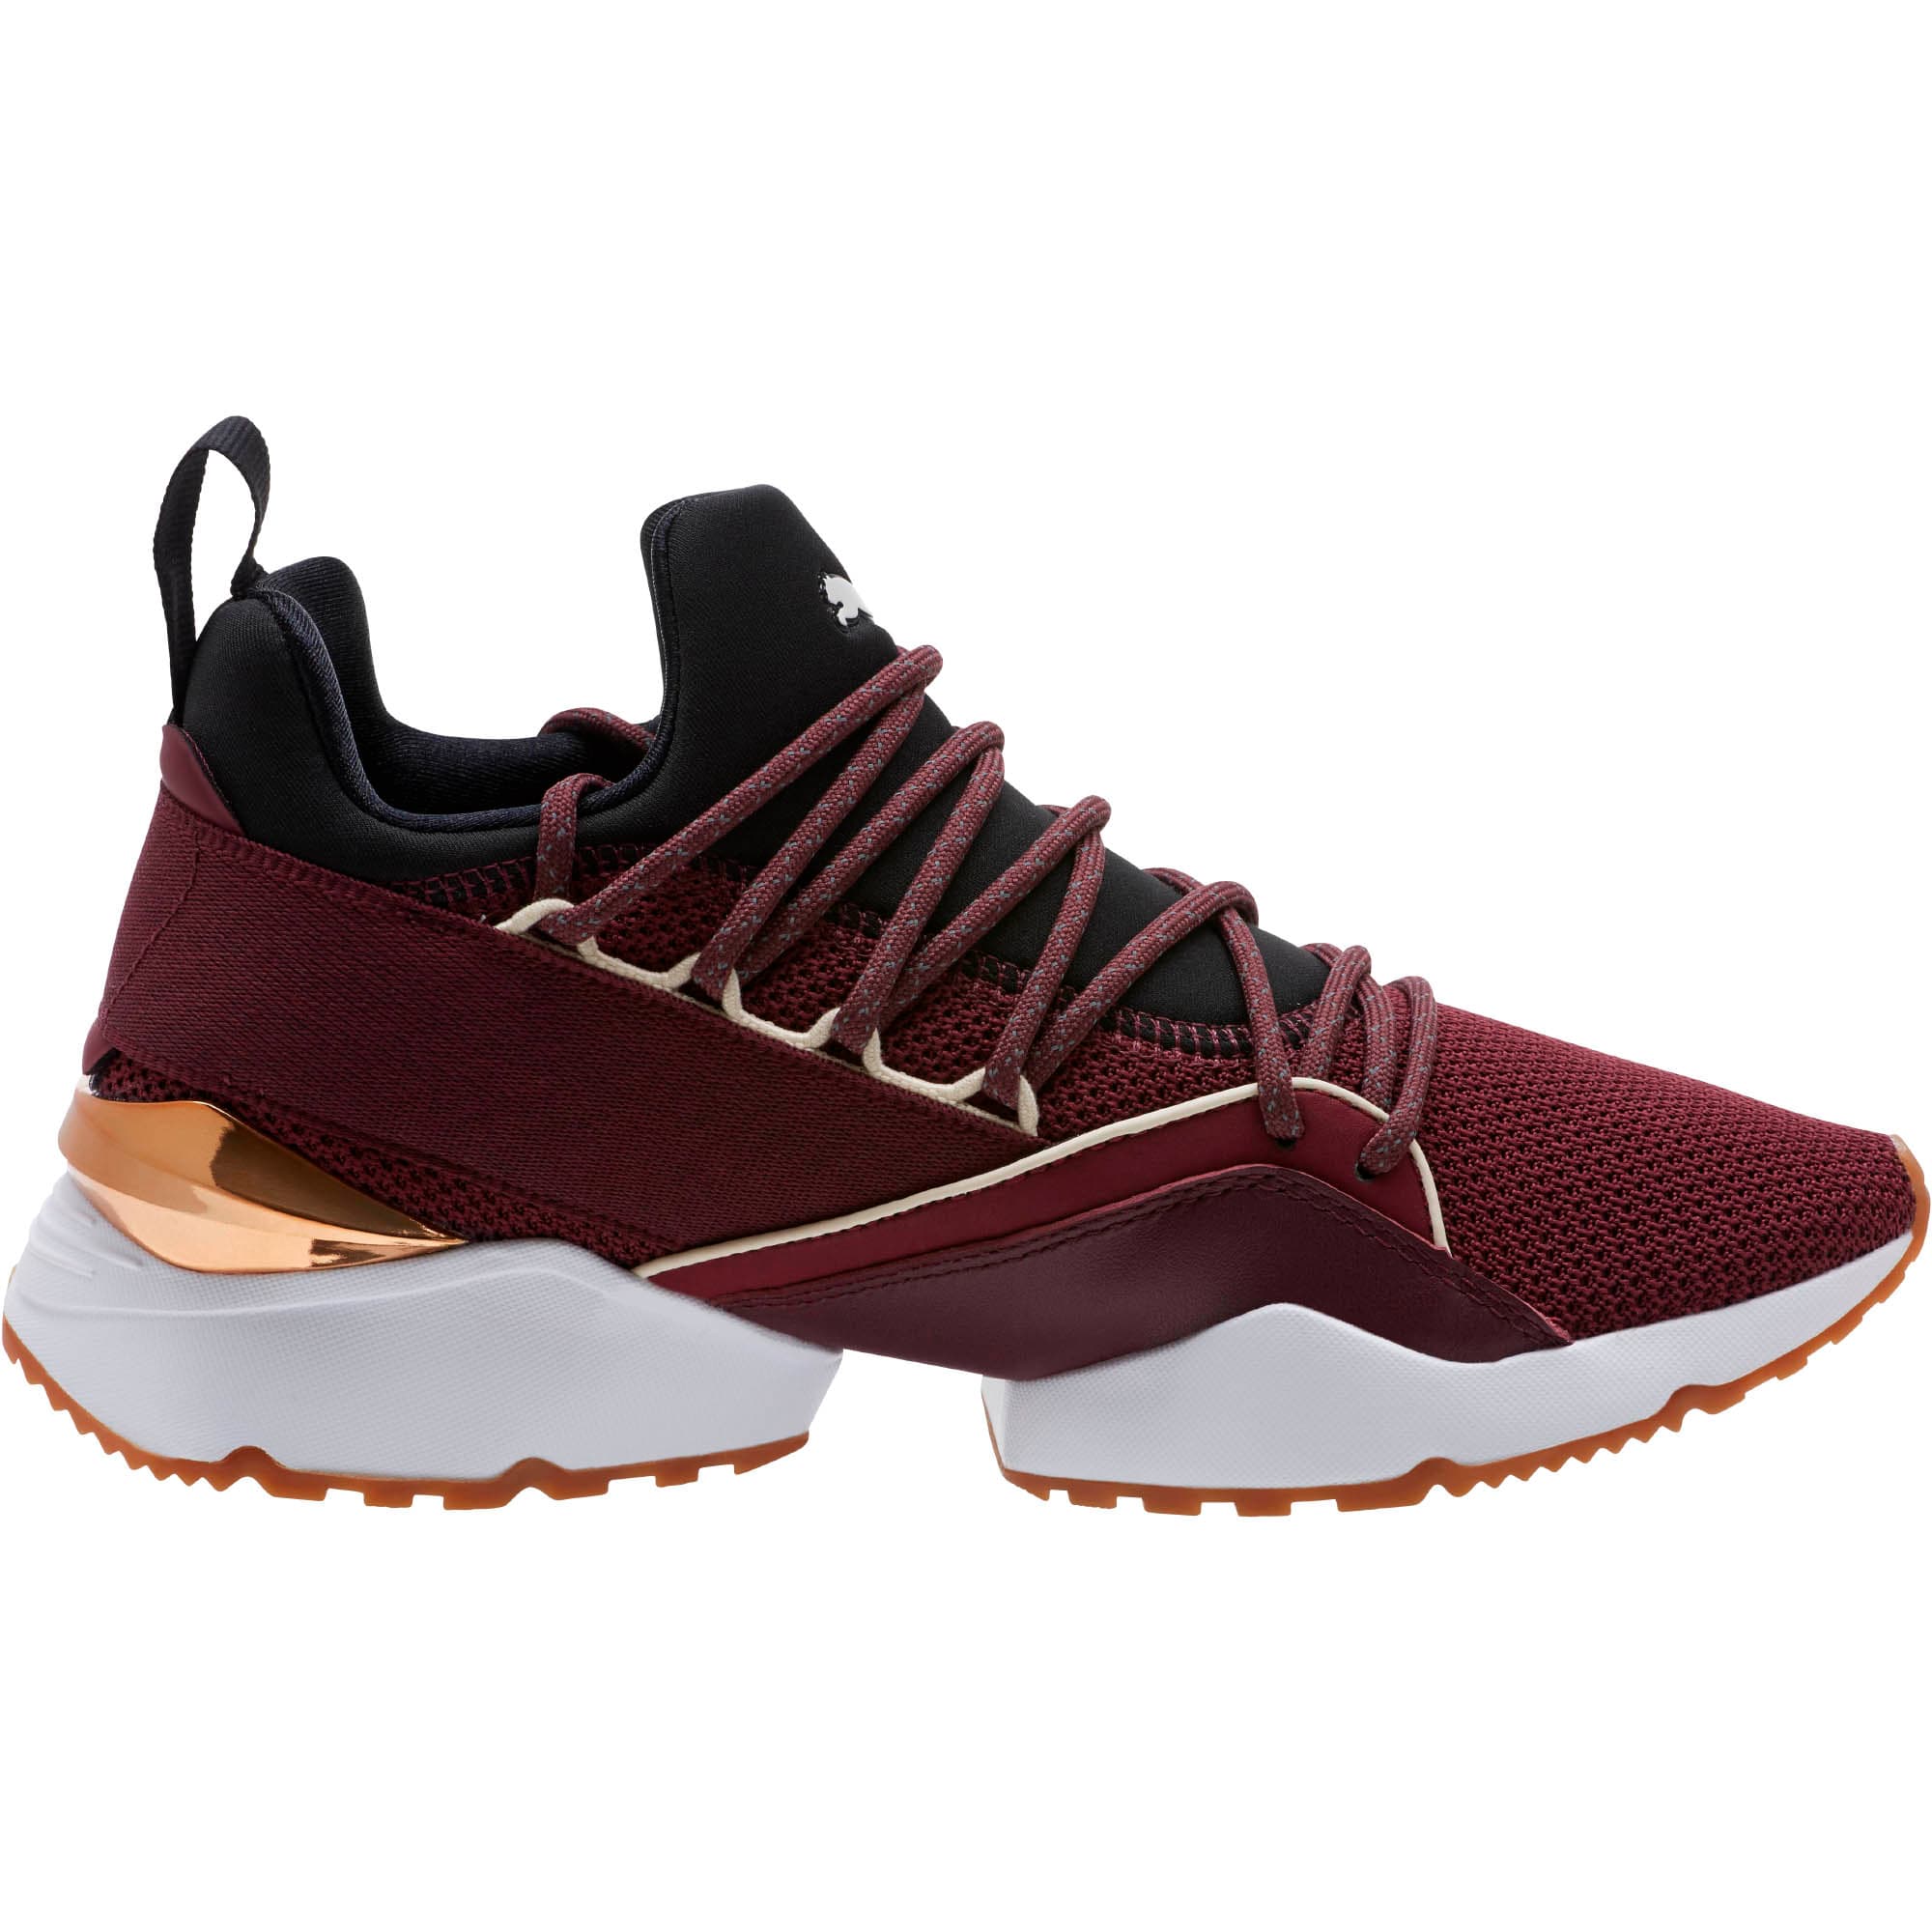 Muse Maia Smet Women's Sneakers | PUMA US